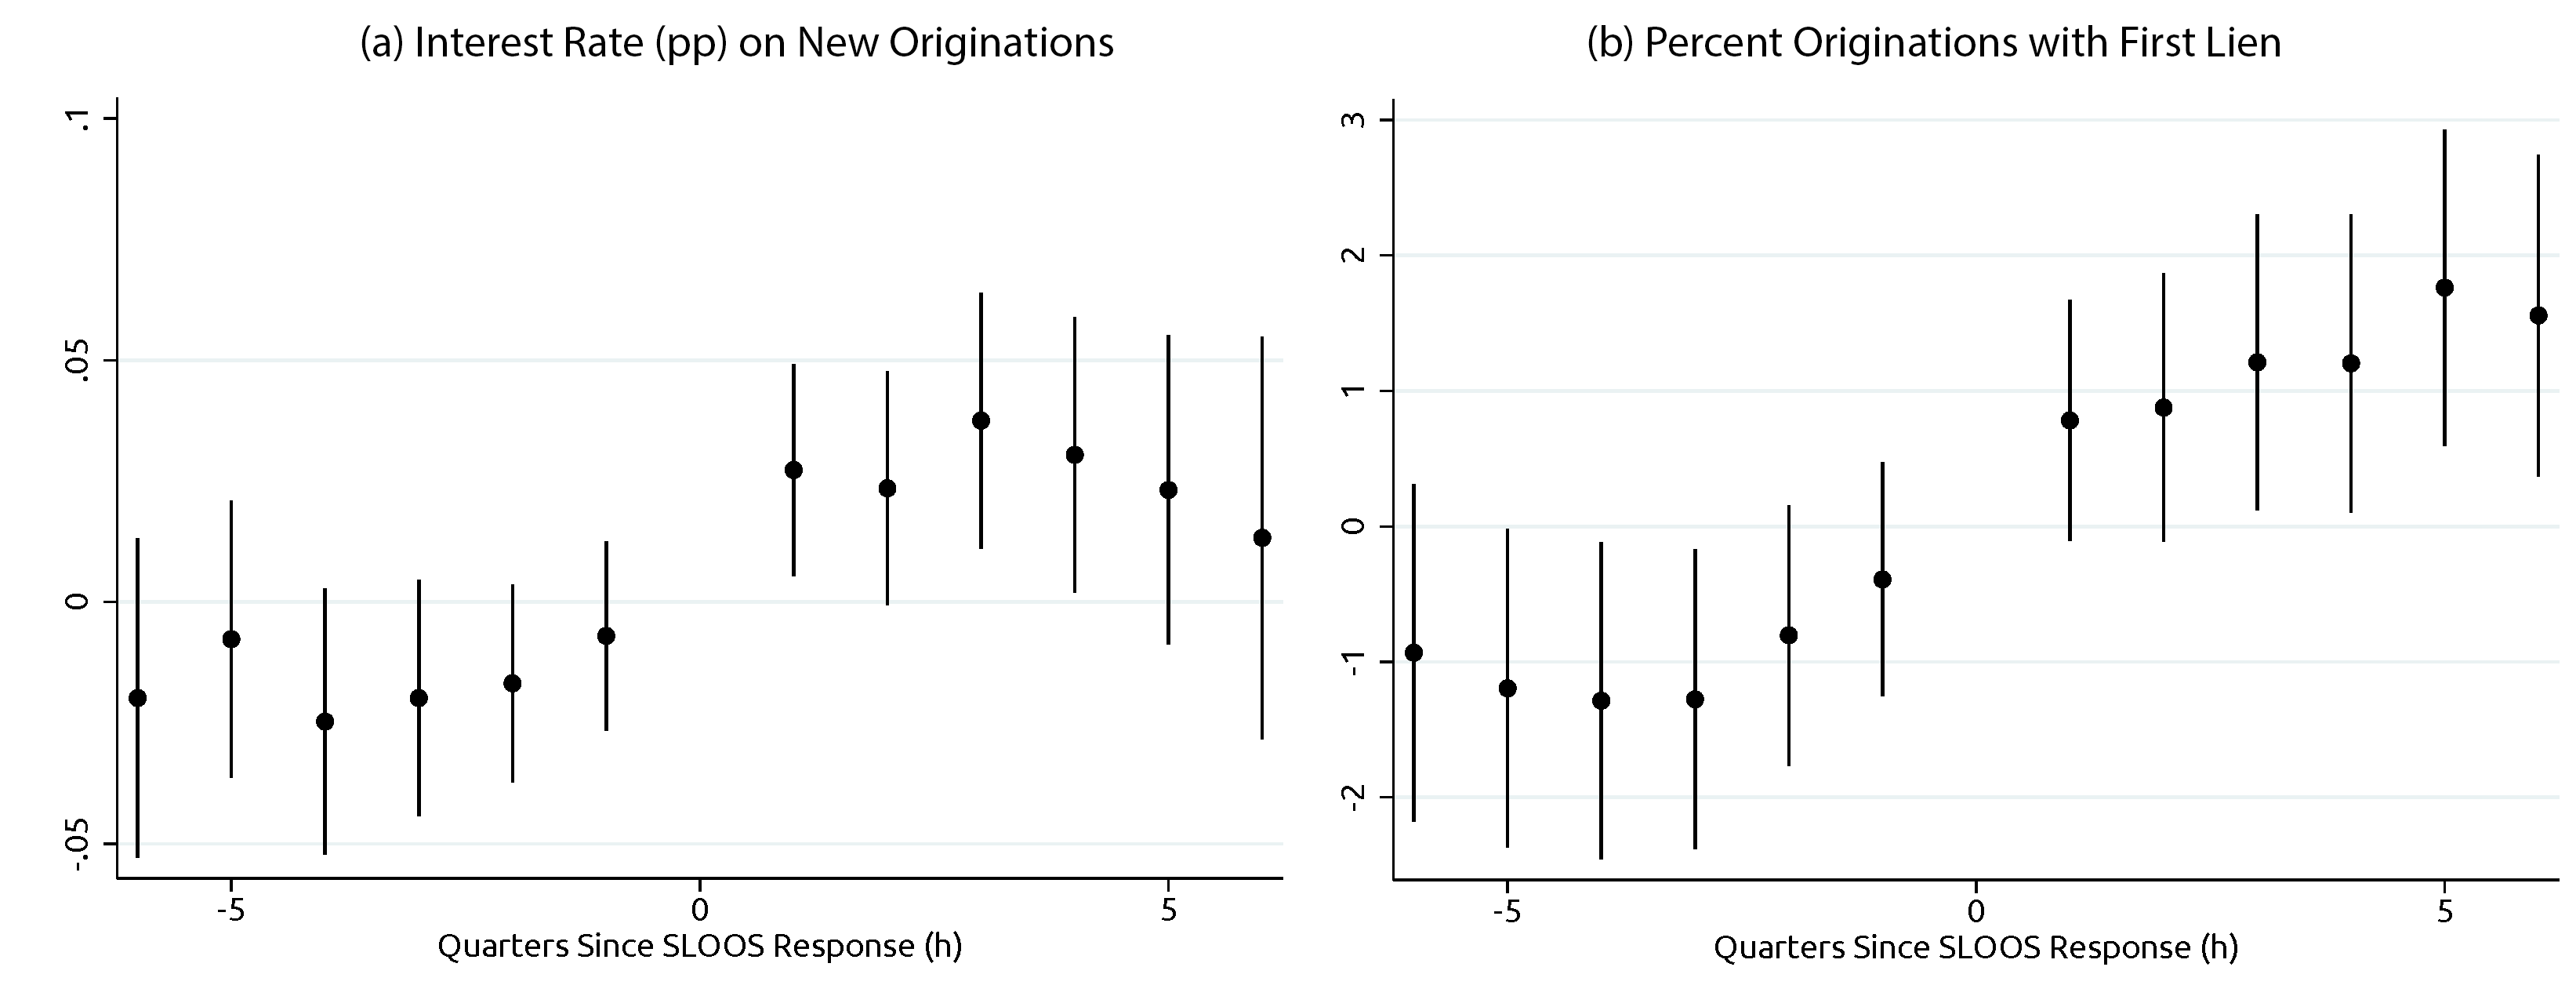 Figure 2. Trends in Origination Characteristics Around a Change in Supply. See accessible link for data.